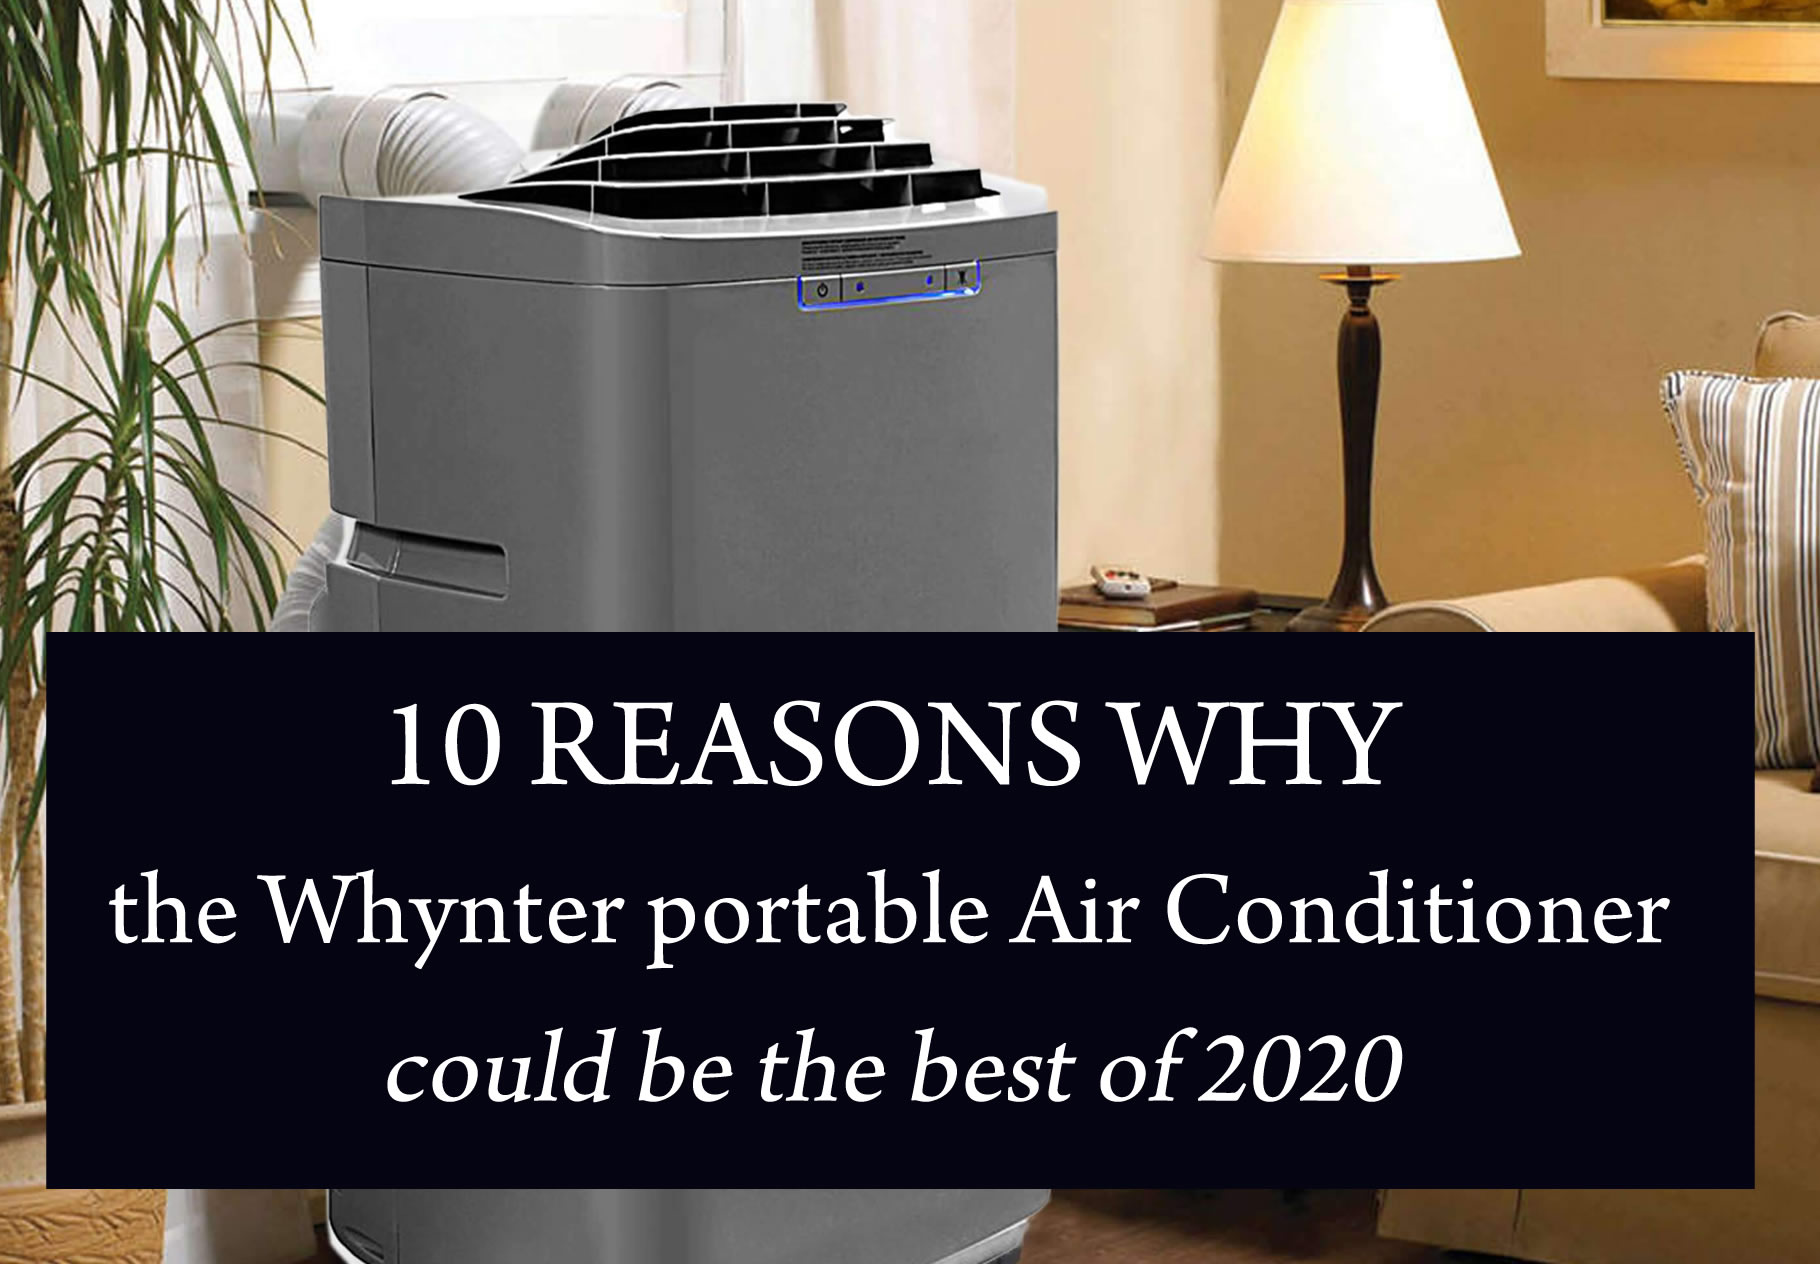 10 Reasons why the Whynter portable Air Conditioner could be the best of 2020